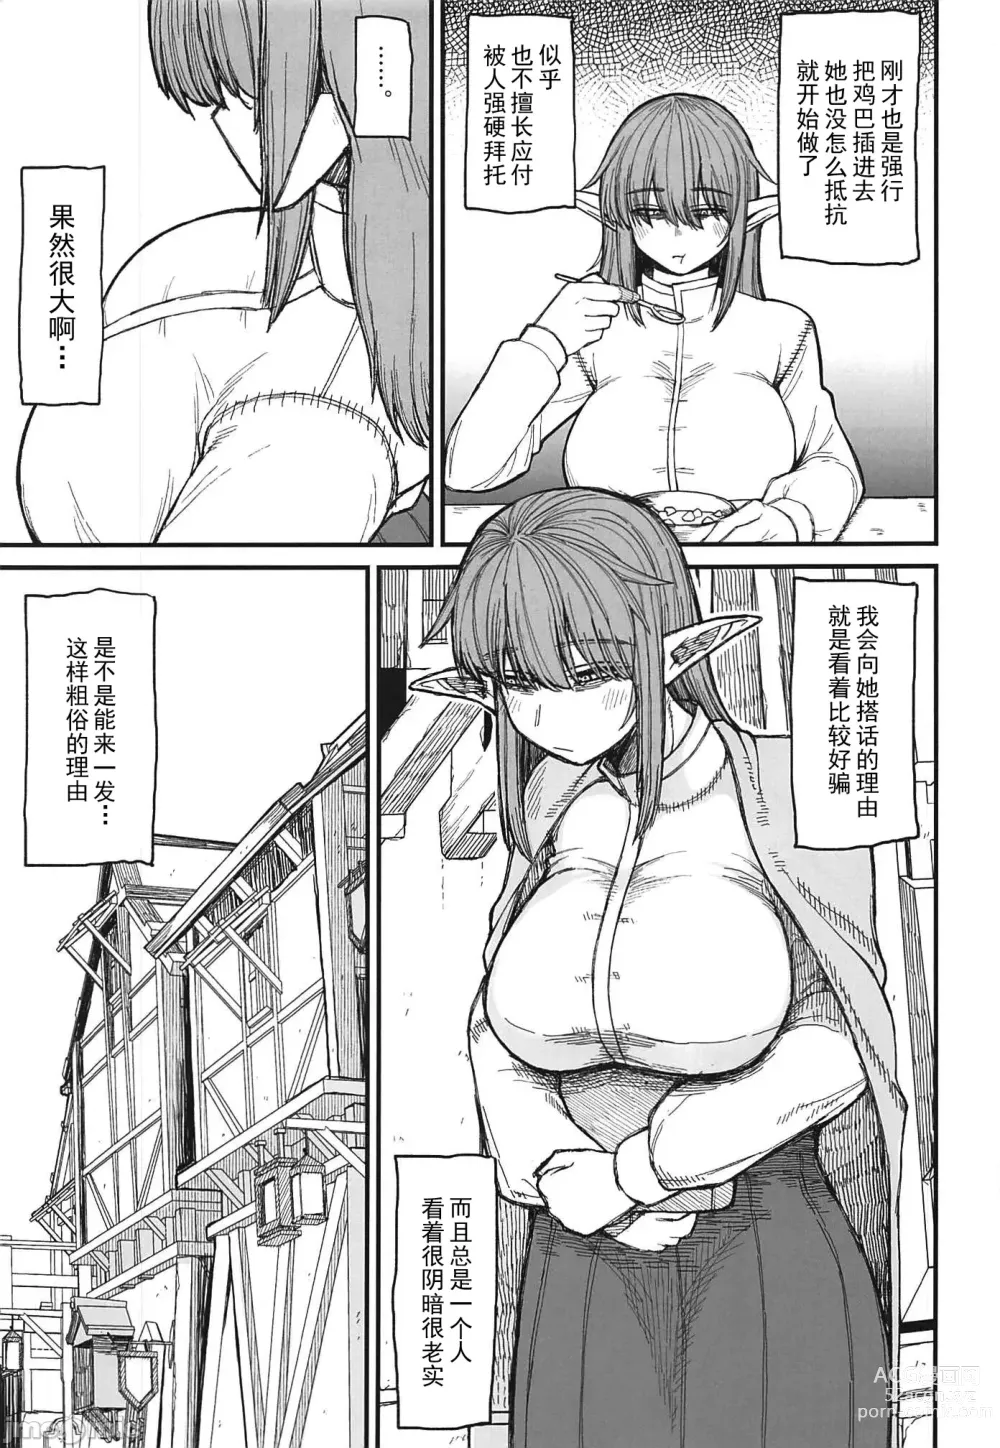 Page 9 of doujinshi 异世界的女人们6.0